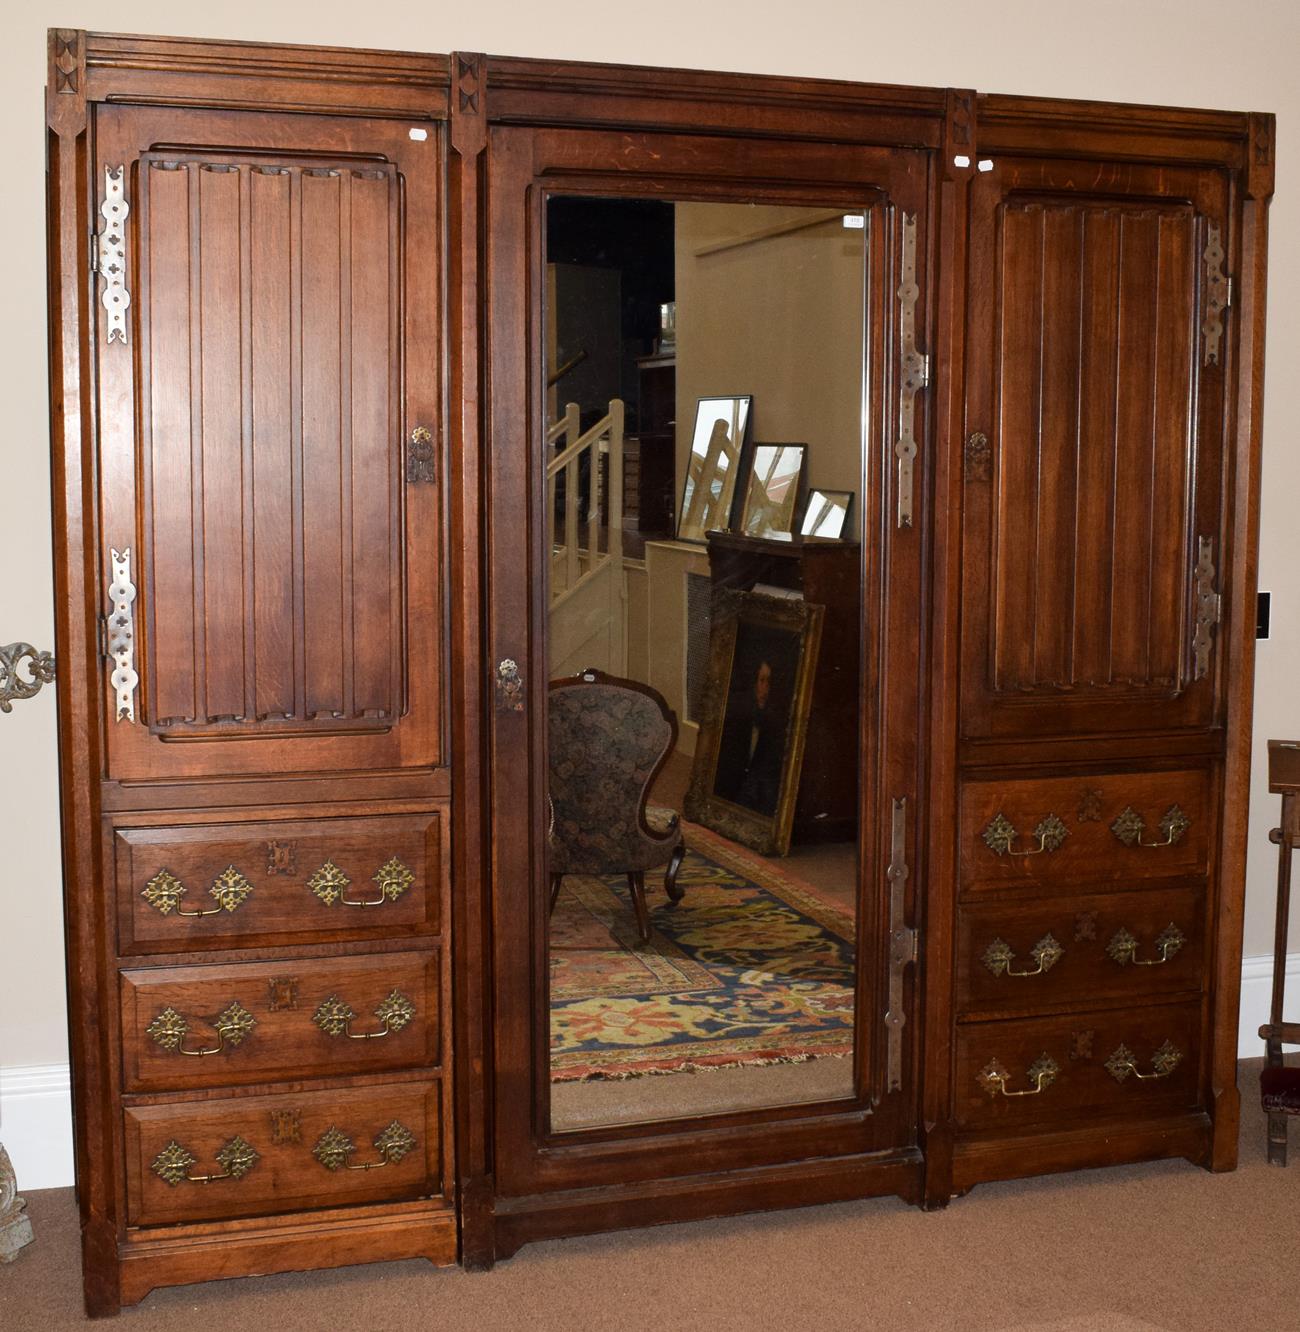 A Victorian Gothic Revival Oak Wardrobe, 19th century, in the manner of A W N Pugin, the linen